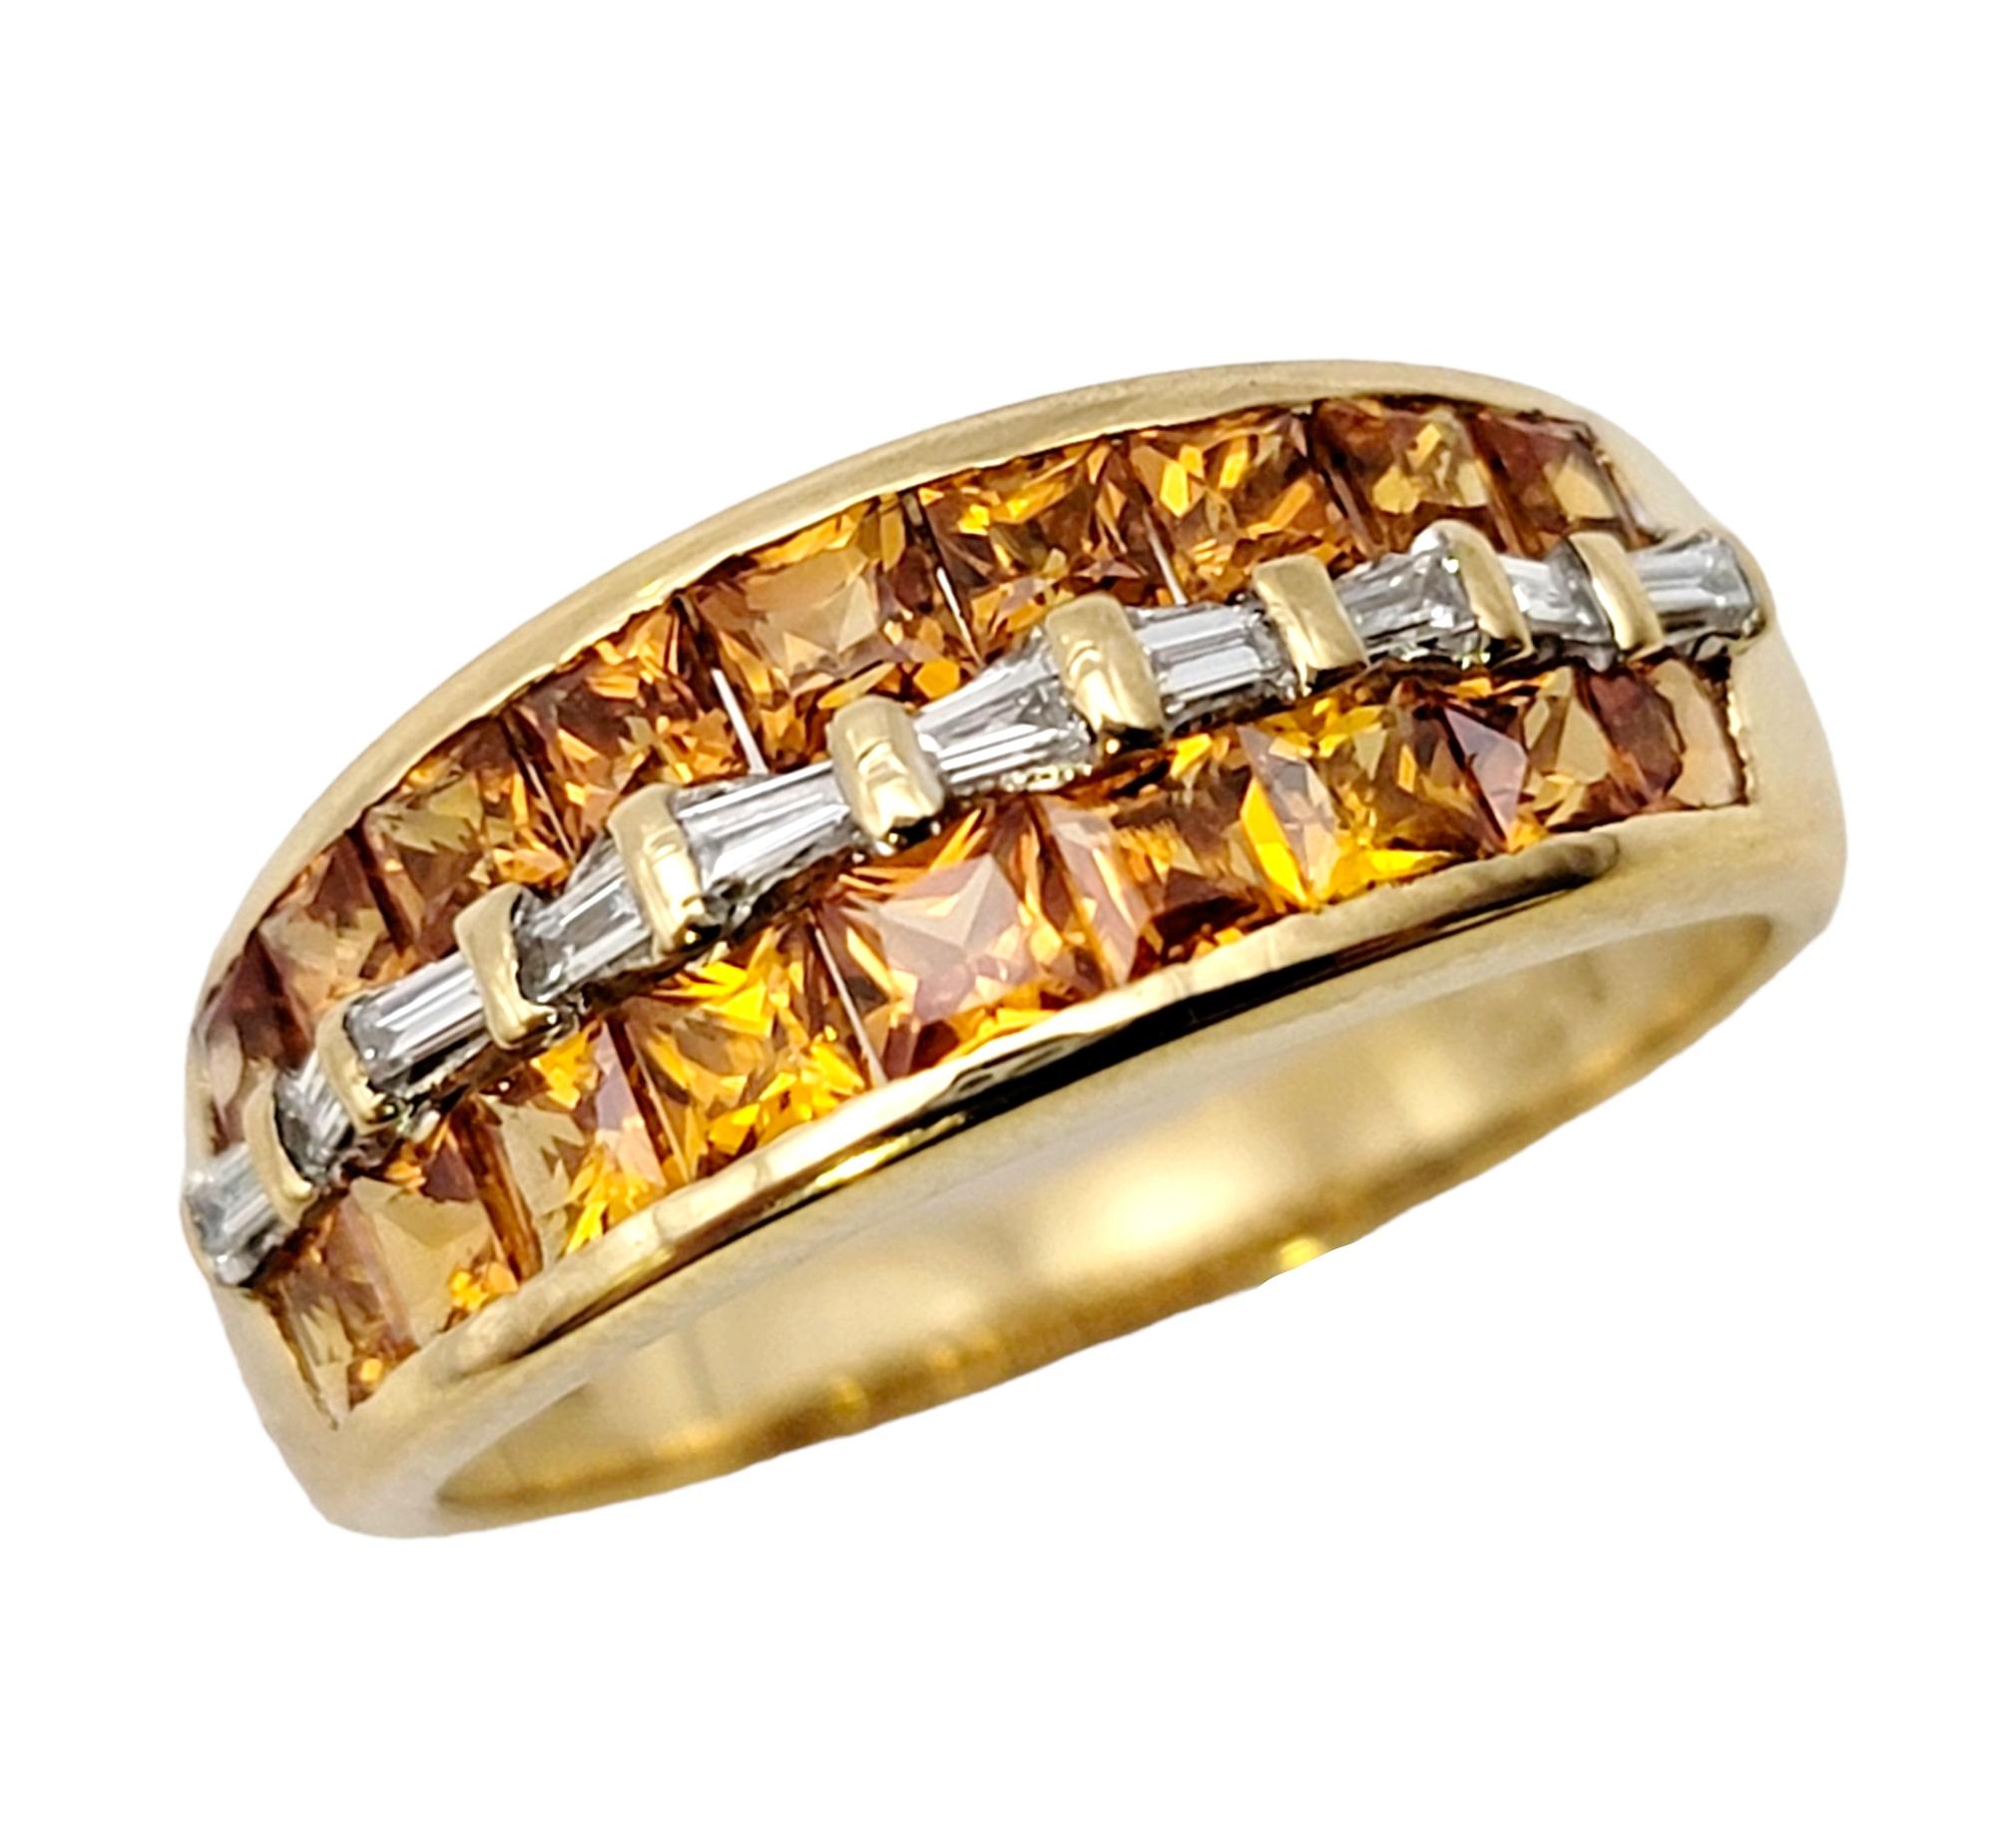 Ring size: 6

Make a bold statement with this captivating multi-row garnet and diamond band ring, exquisitely crafted in 18 karat yellow gold. The vibrant reddish-orange hues of the garnets combined with the sparkling diamonds create a mesmerizing